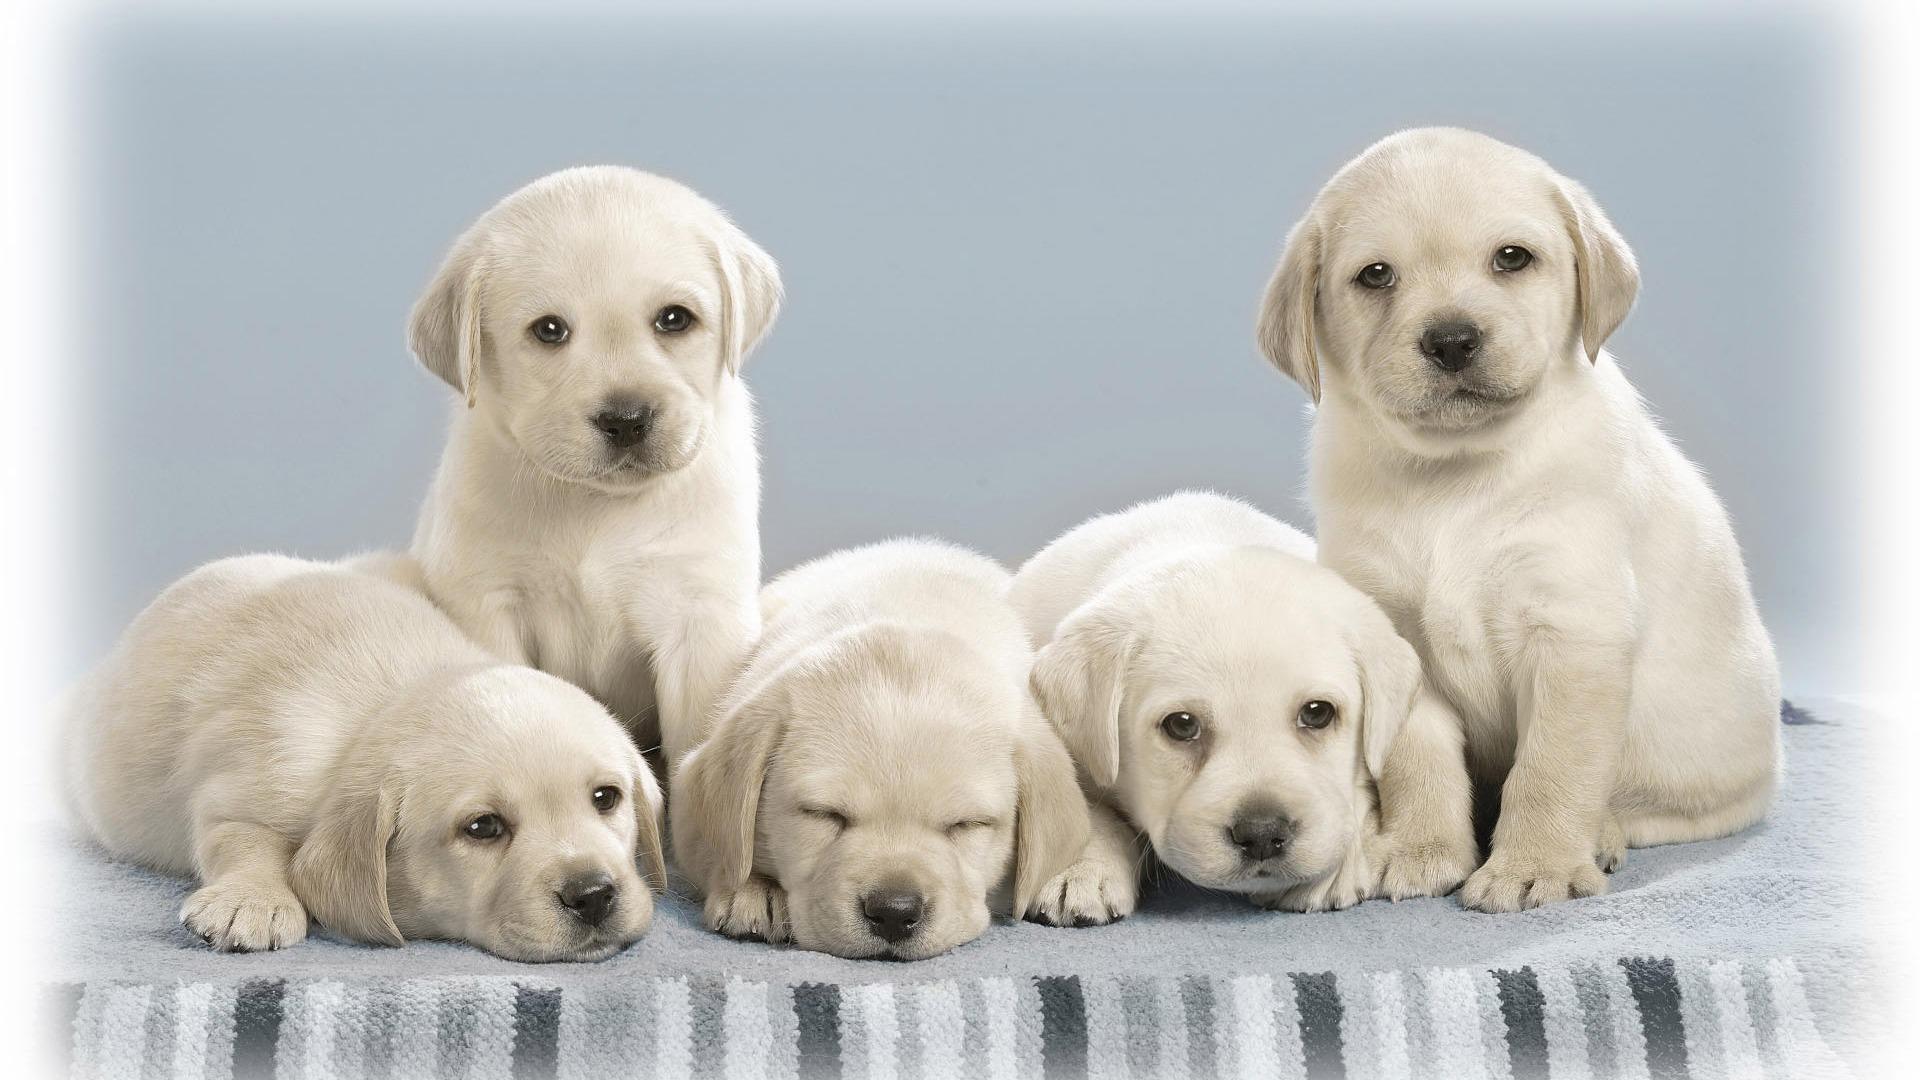 Little Baby Dogs Image HD Photo